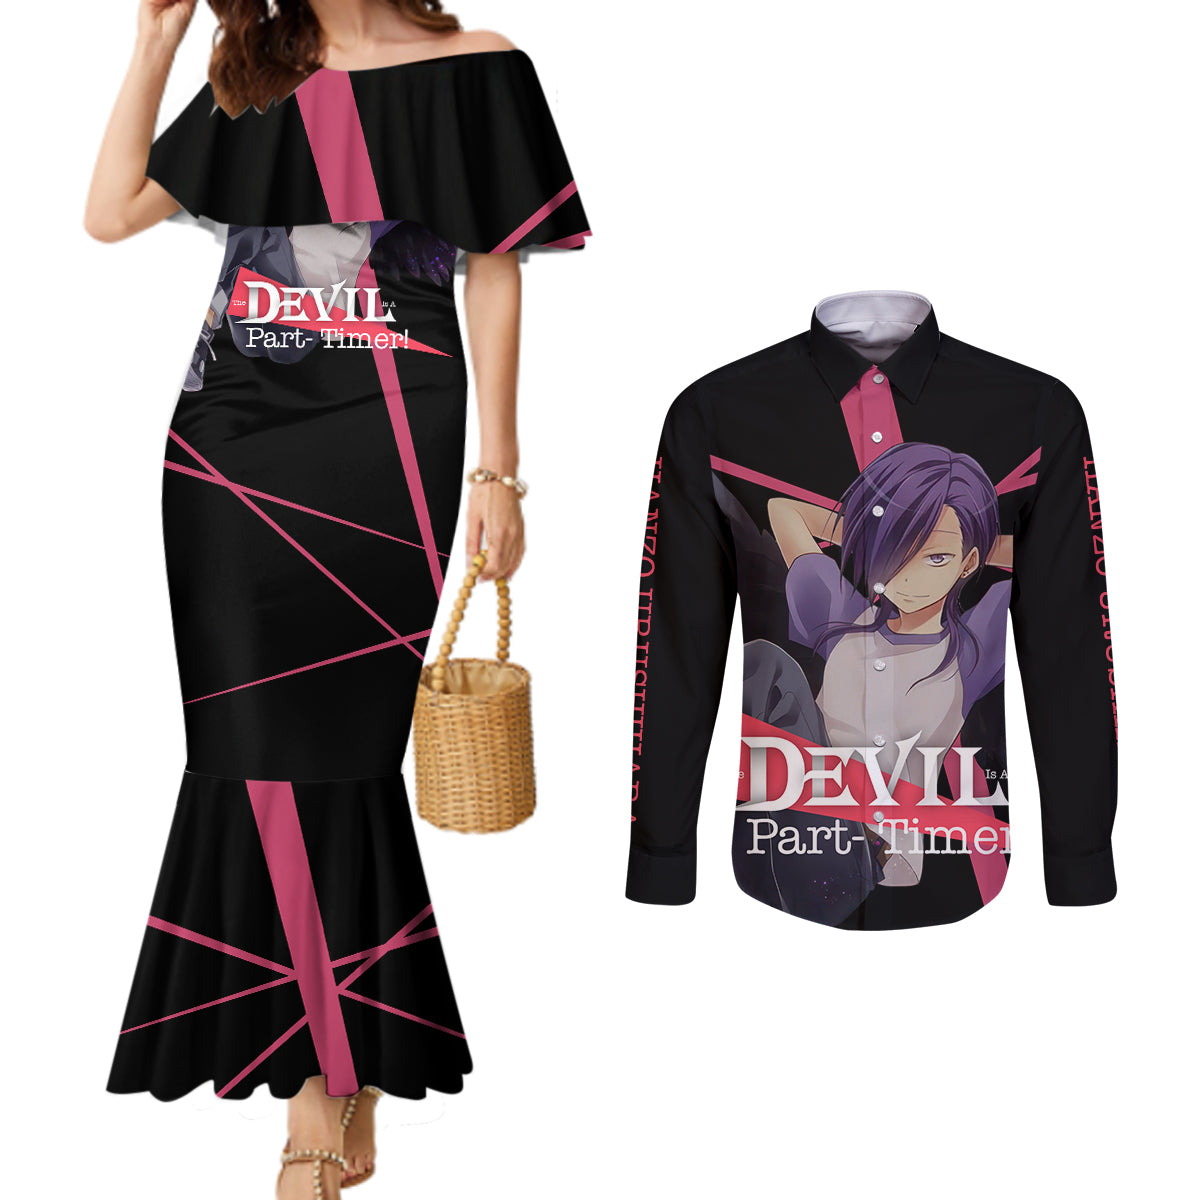 Hanzo Urushihara The Devil Part Timer Couples Matching Mermaid Dress and Long Sleeve Button Shirt Anime Style